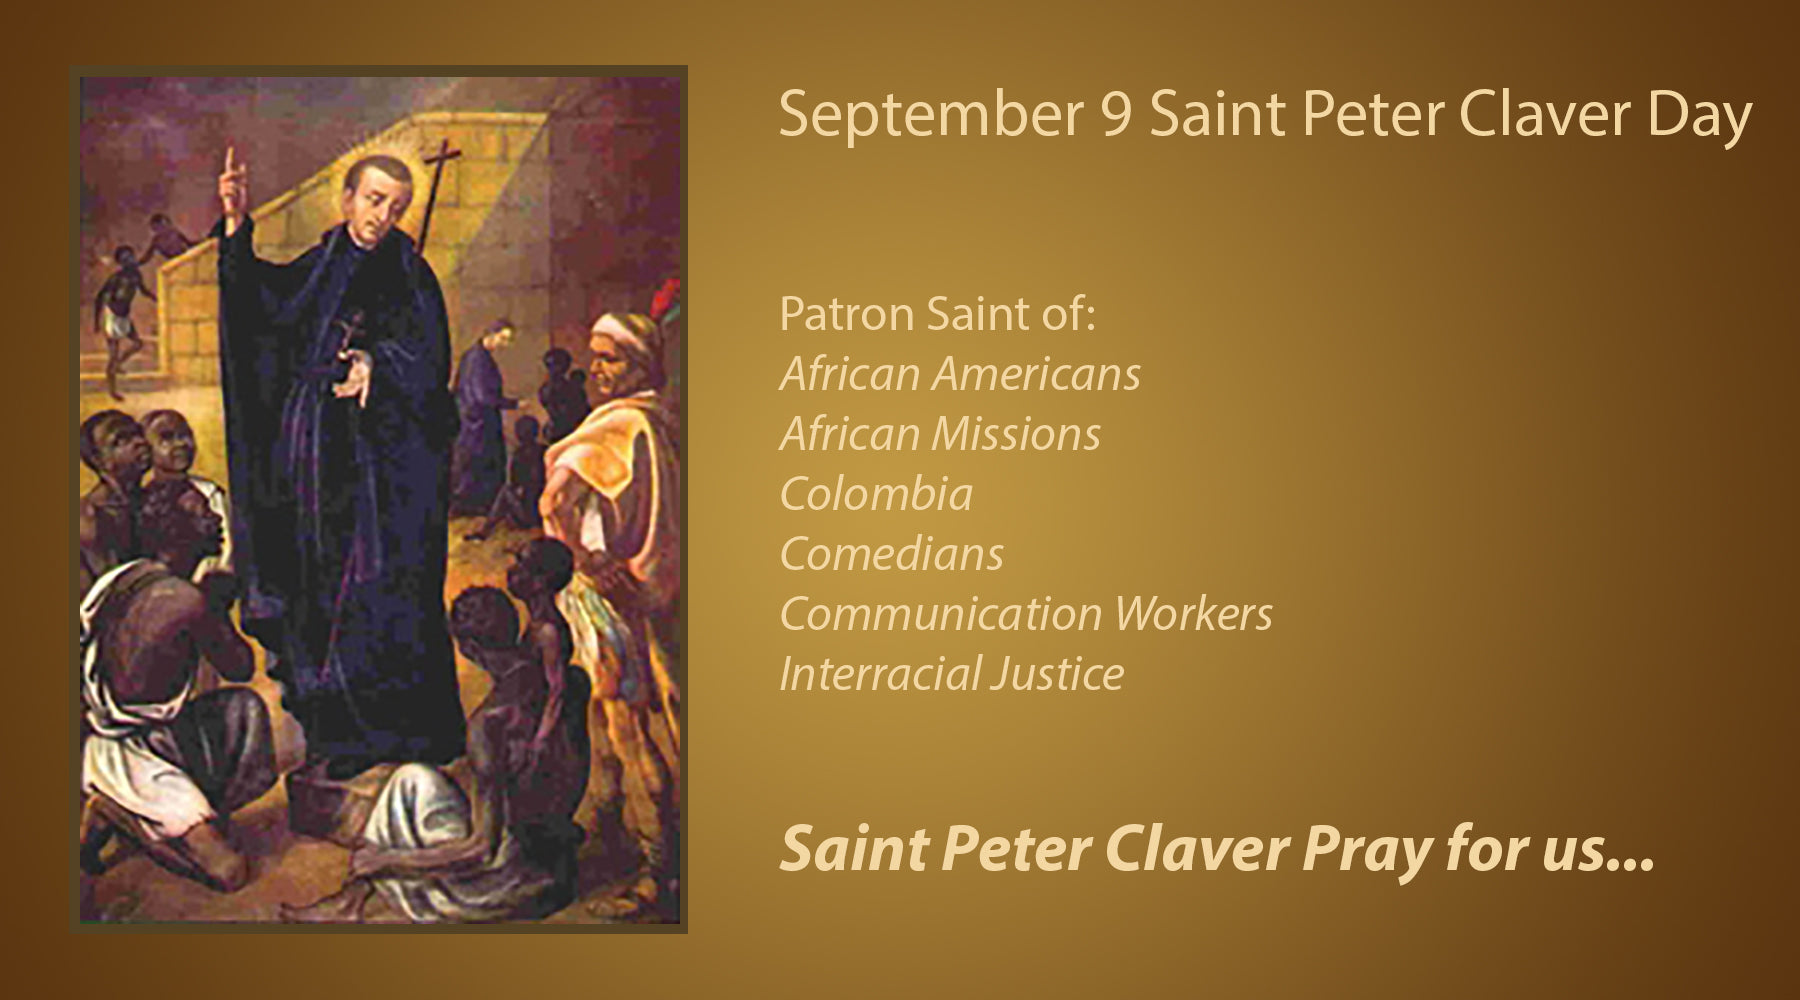 Saint Peter Claver, Saint of the Day, September 9